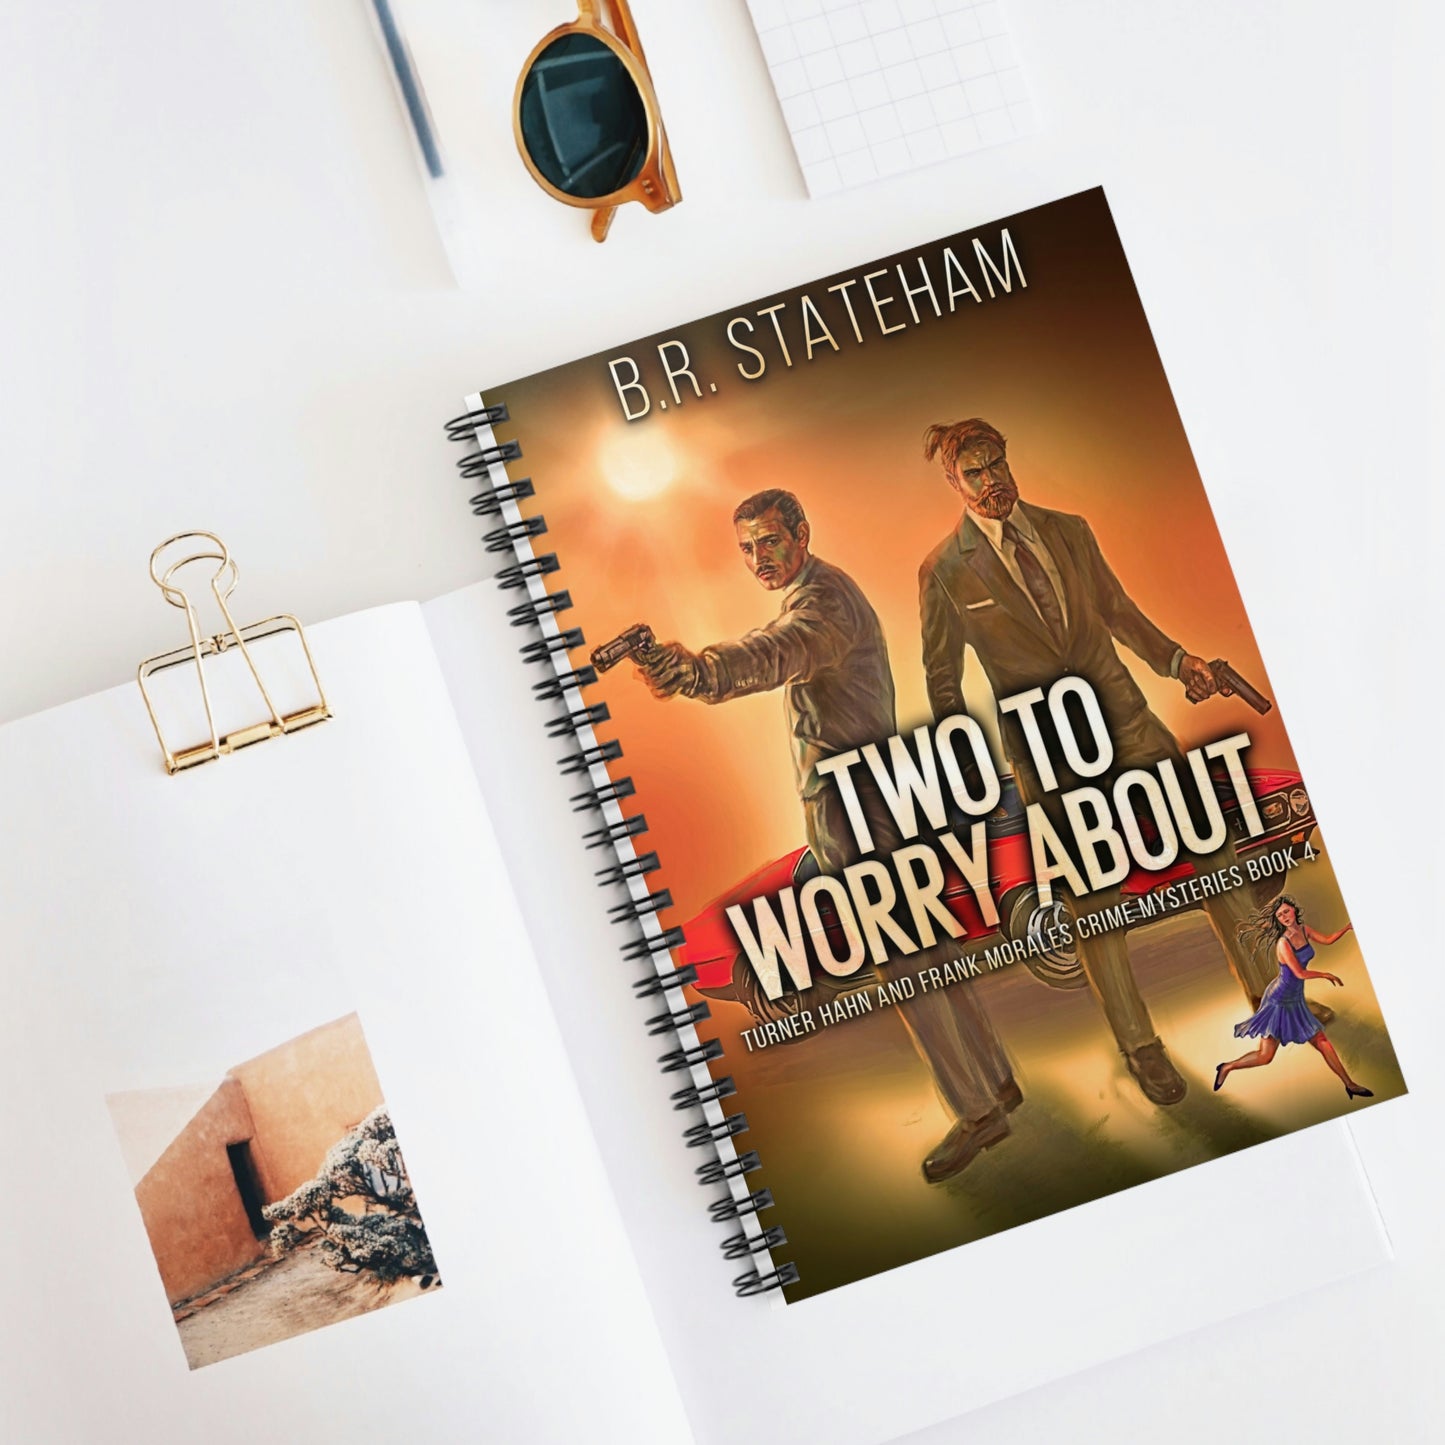 Two to Worry About - Spiral Notebook